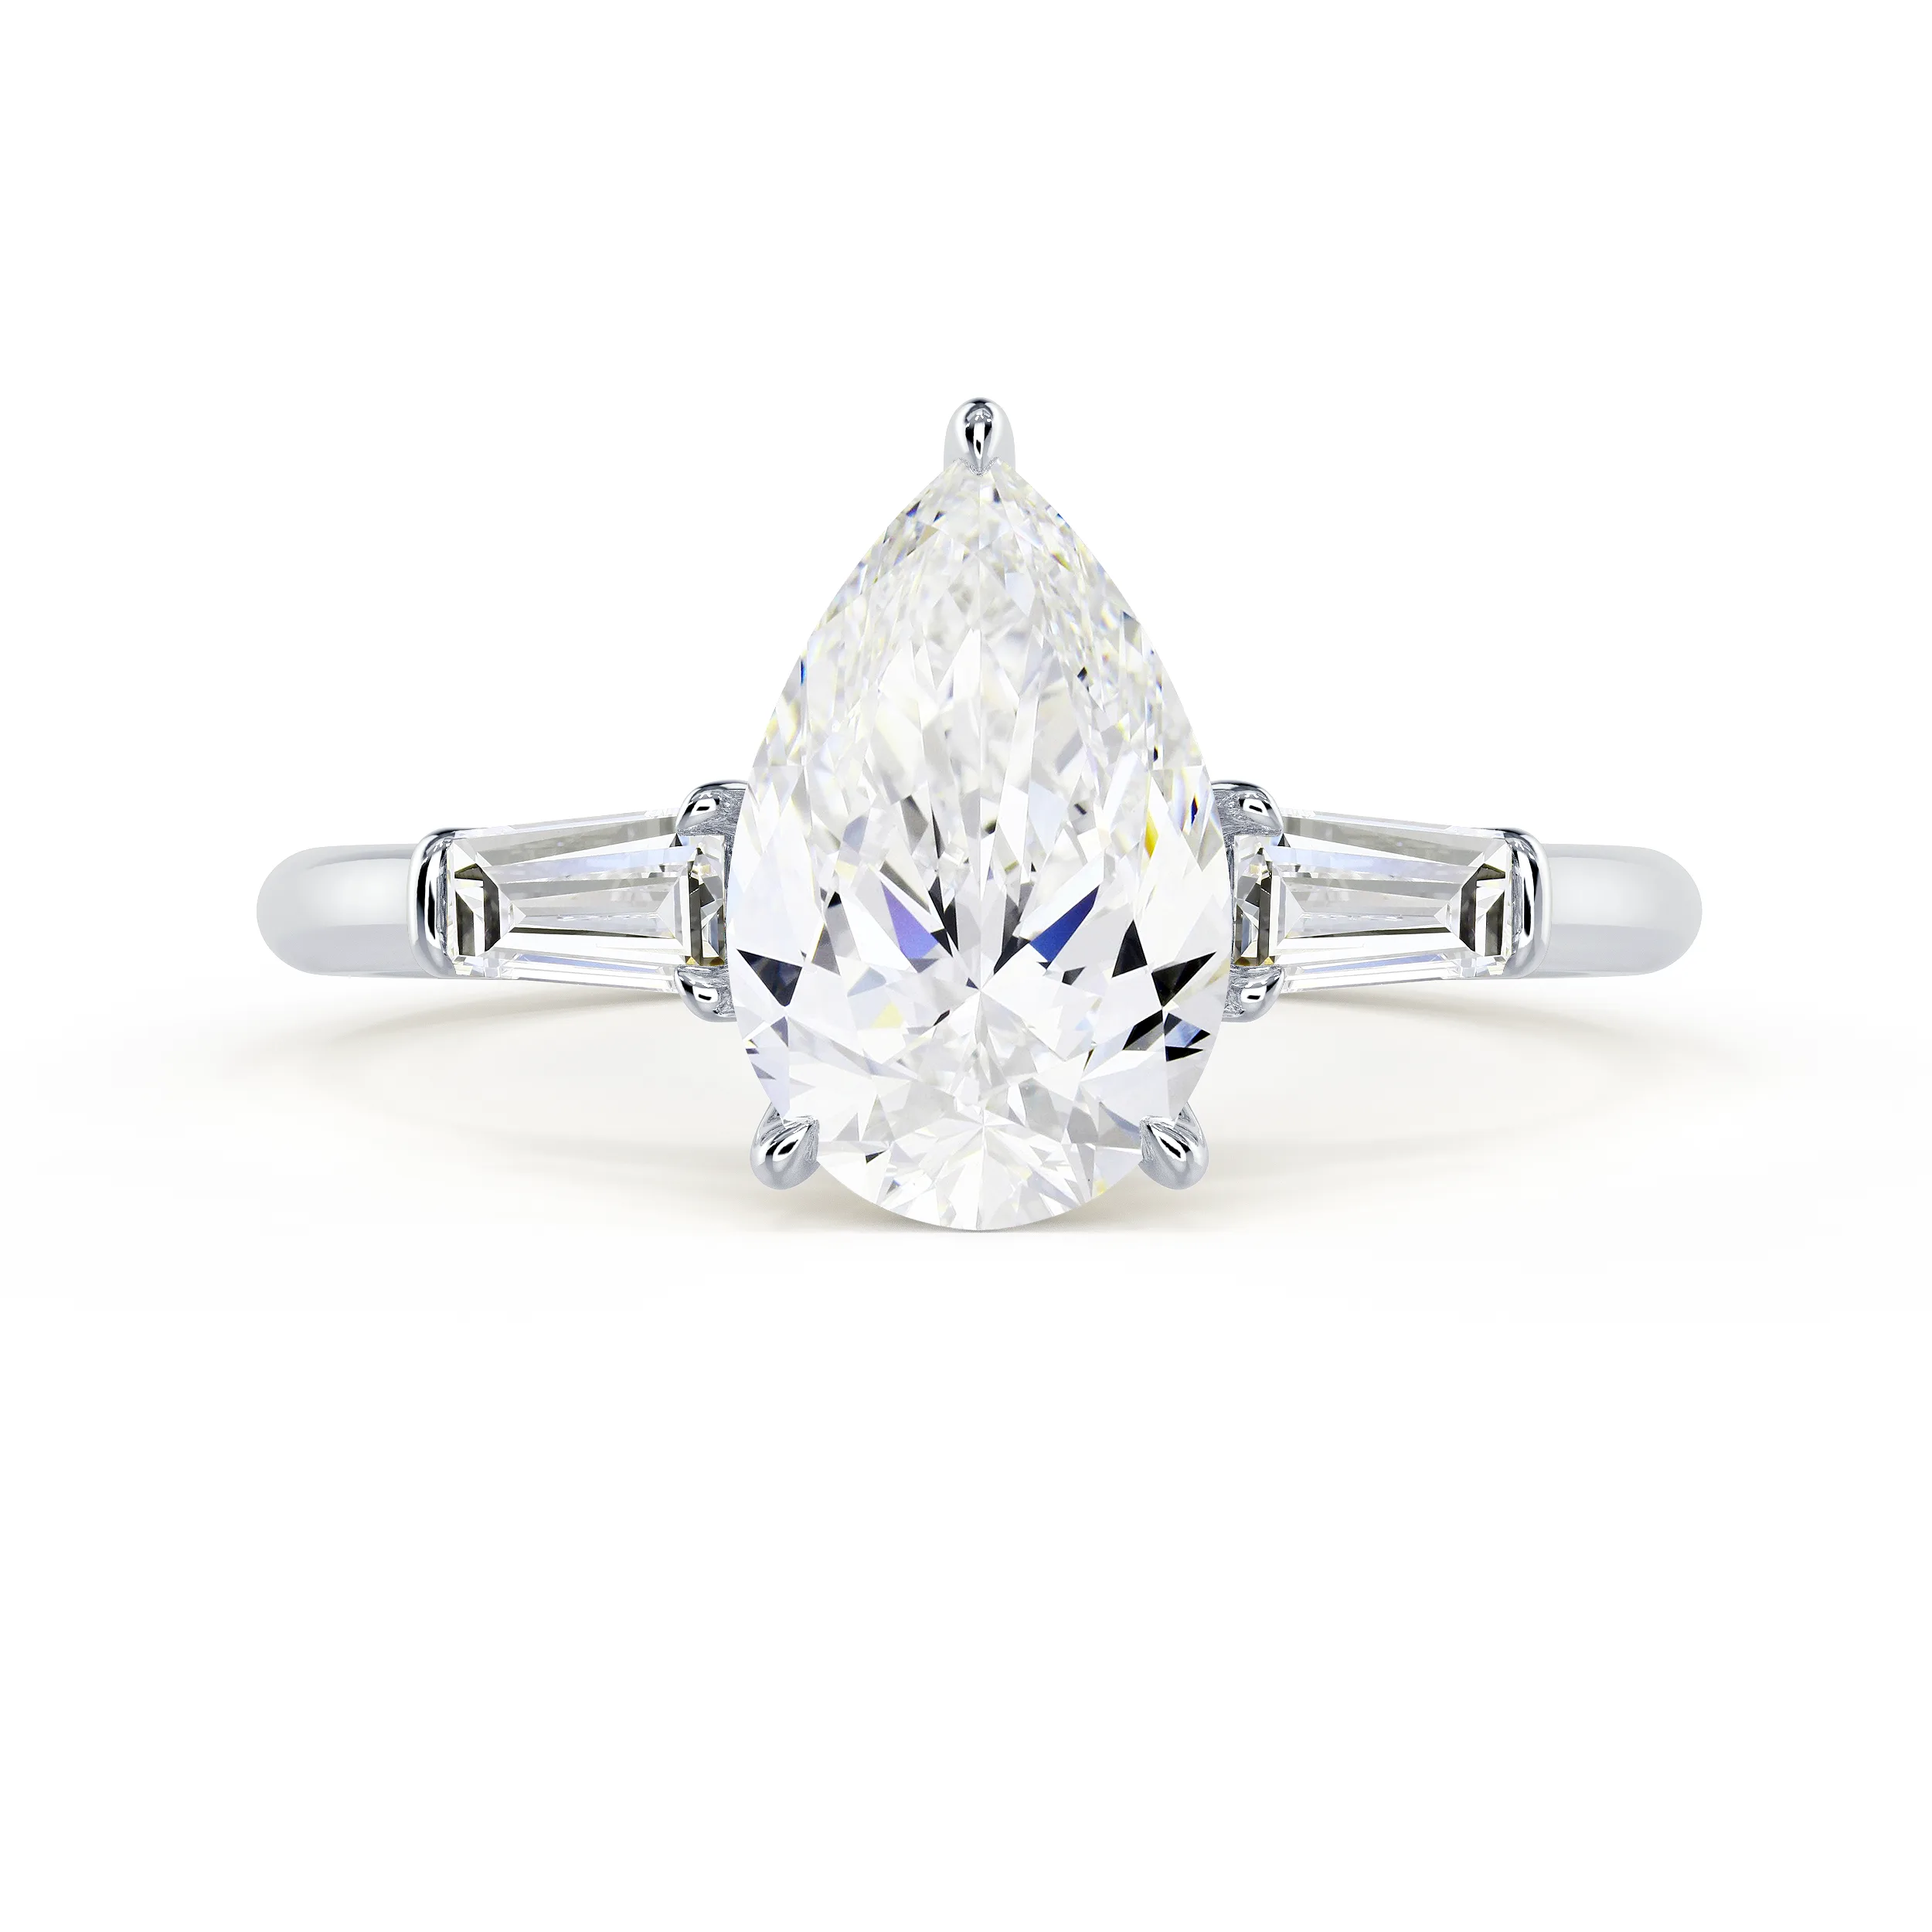 Exceptional Quality Lab Diamonds set in White Gold Pear and Baguette Diamond Engagement Ring (Main View)